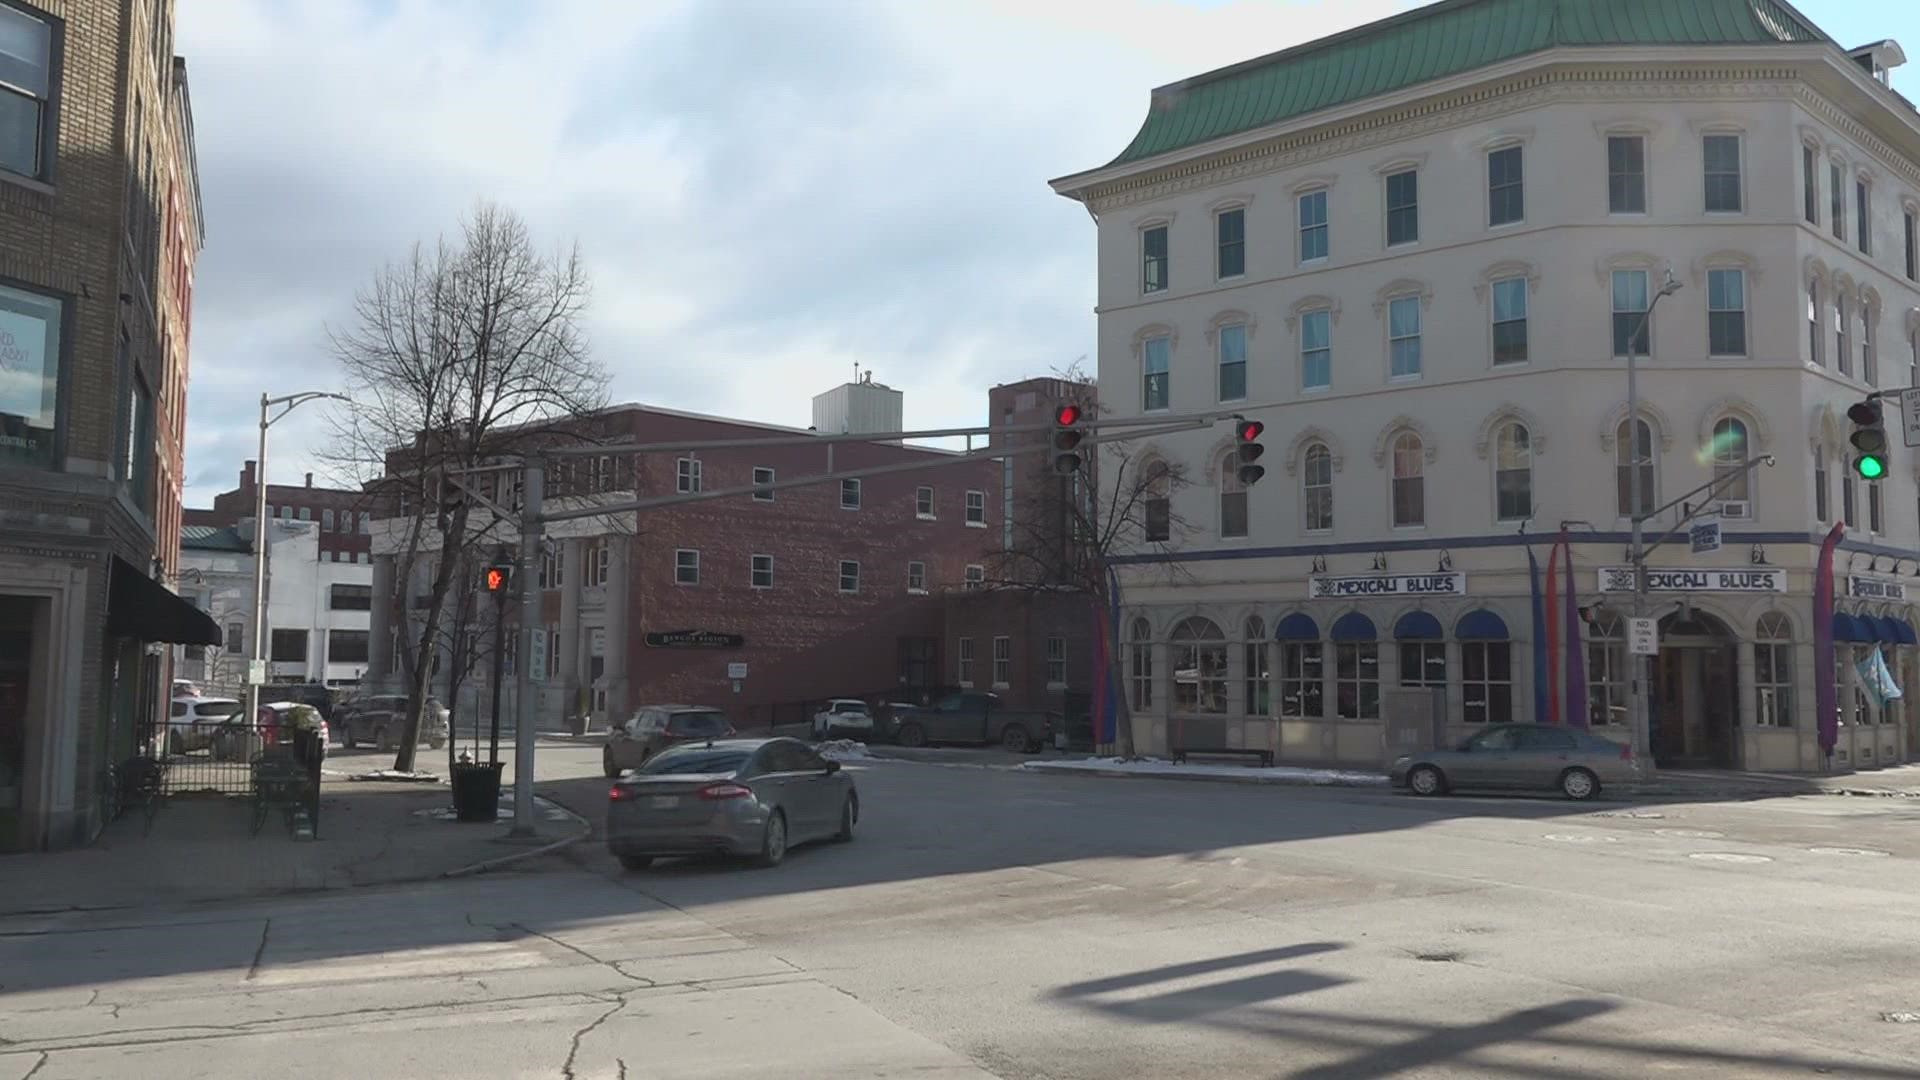 Downtown Bangor Partnership says empty storefronts are soon to see a breath of new life in the upcoming year.